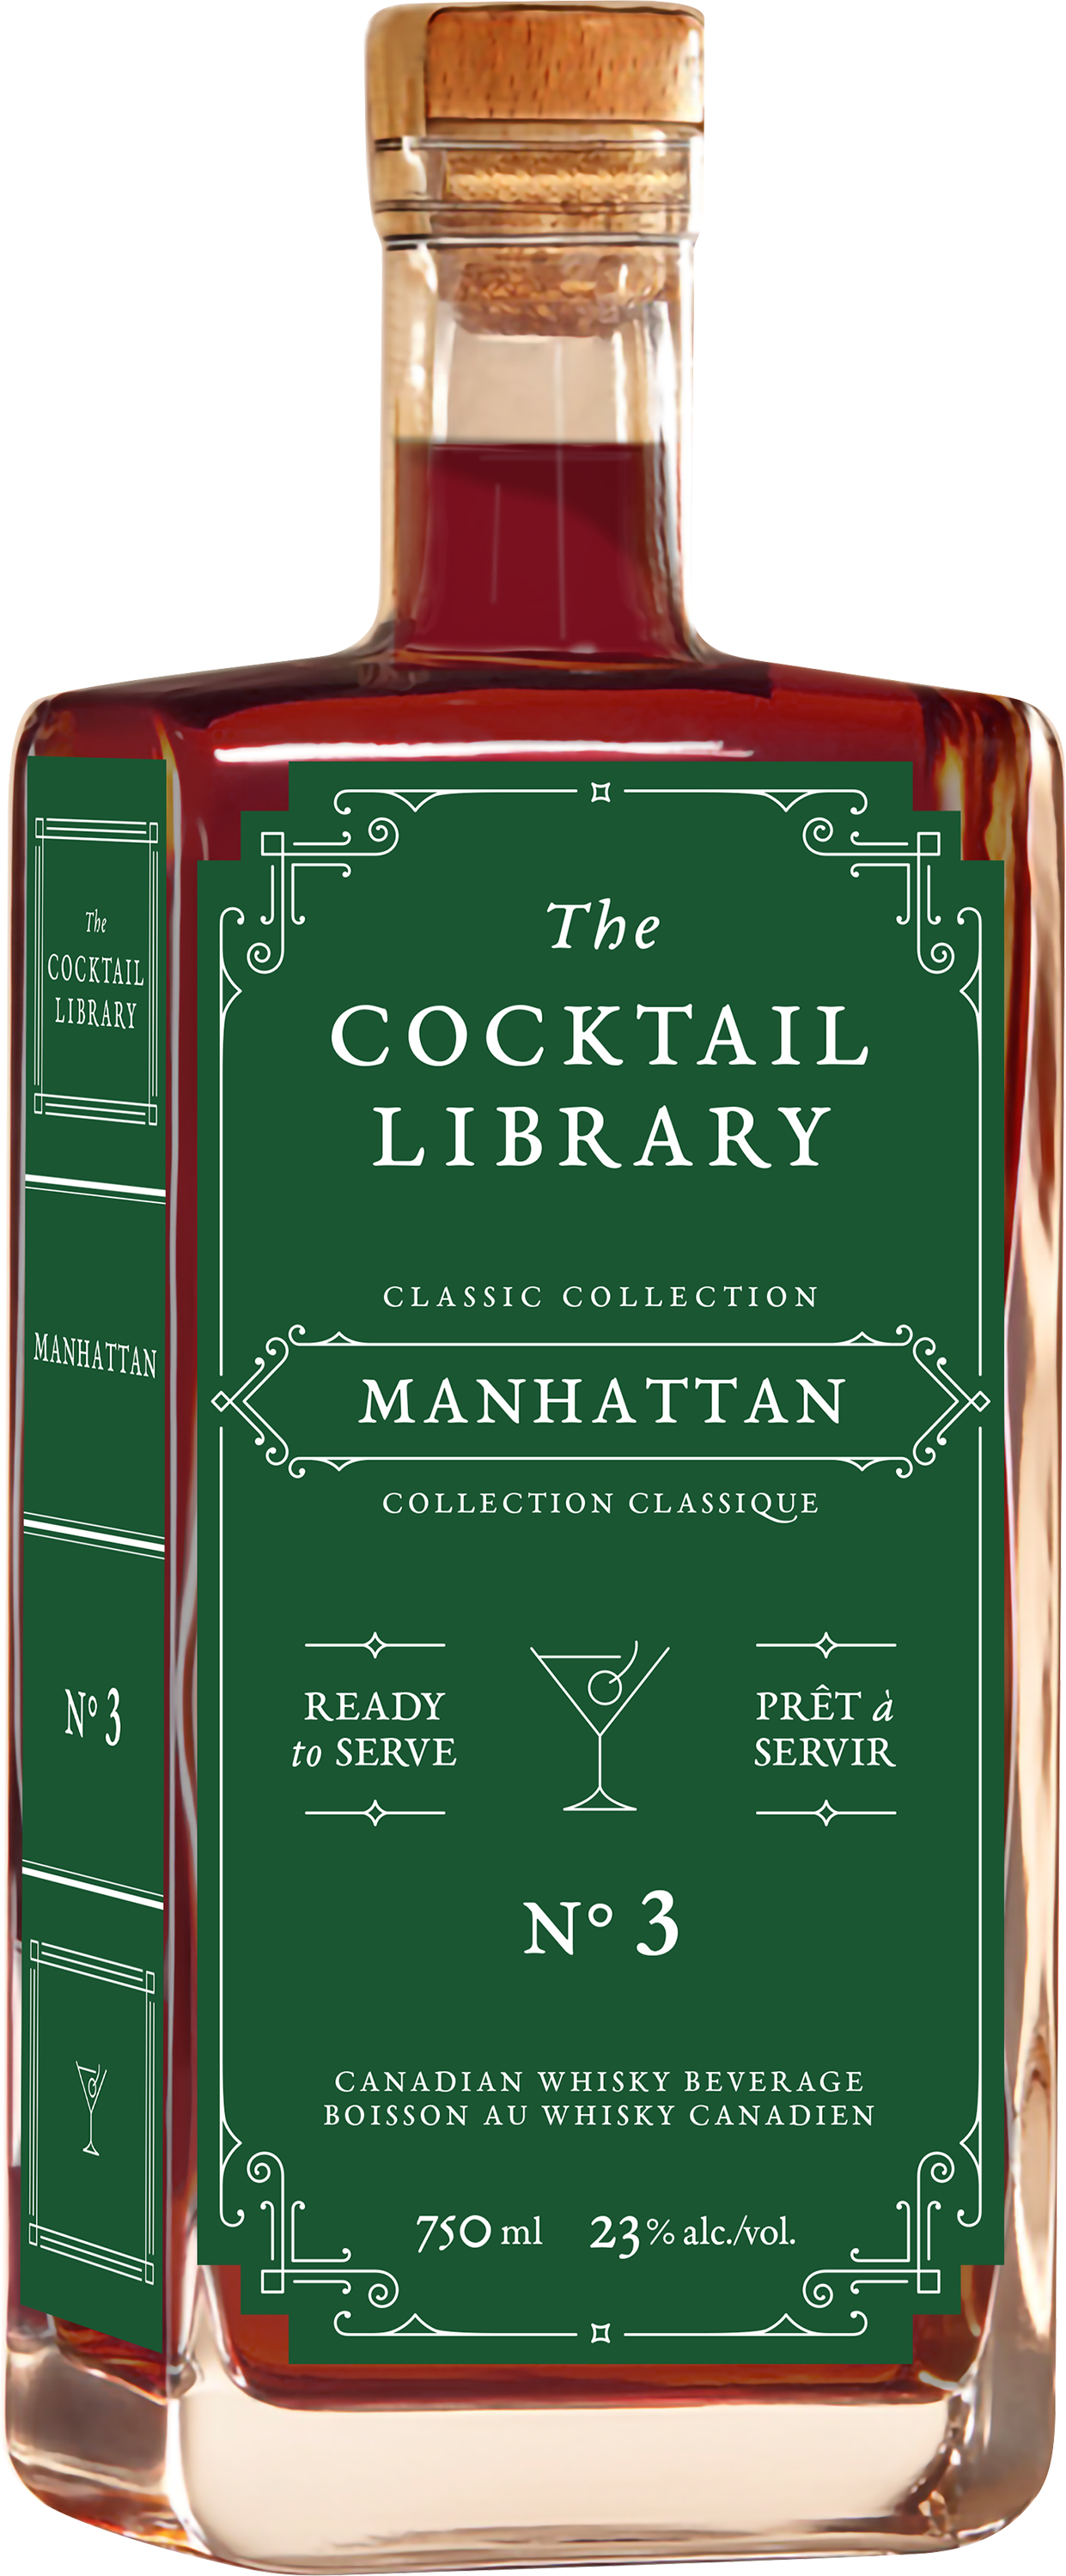 The Cocktail Library Manhattan